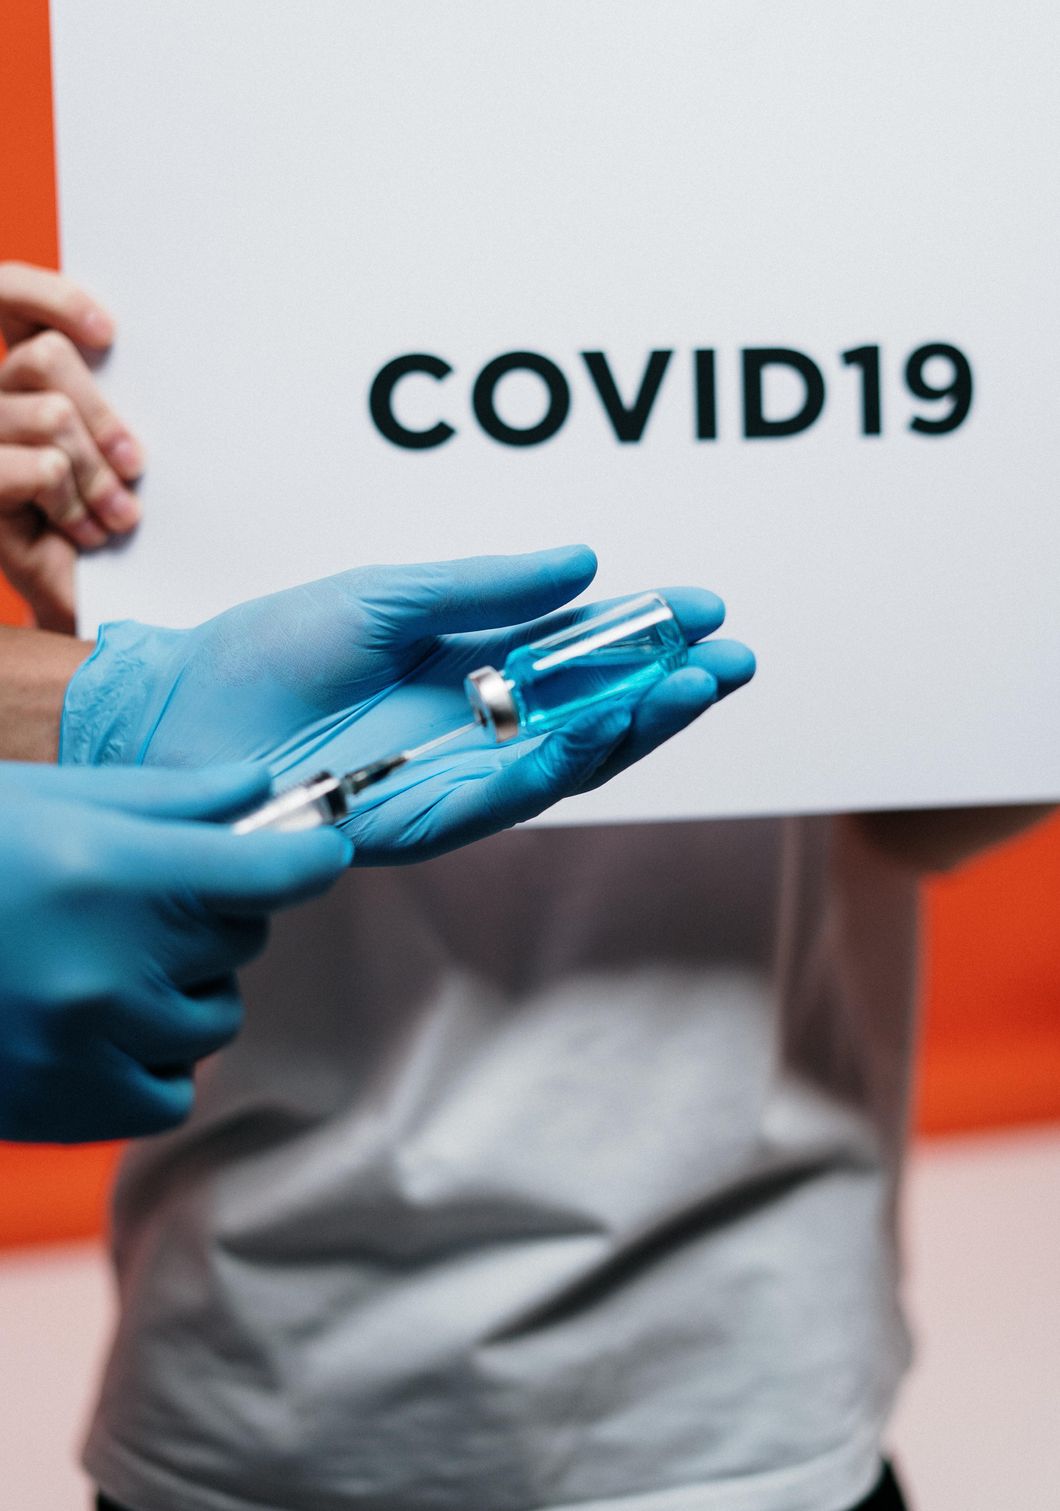 You Shouldn't Be Asking People If They've Gotten The COVID-19 Vaccine